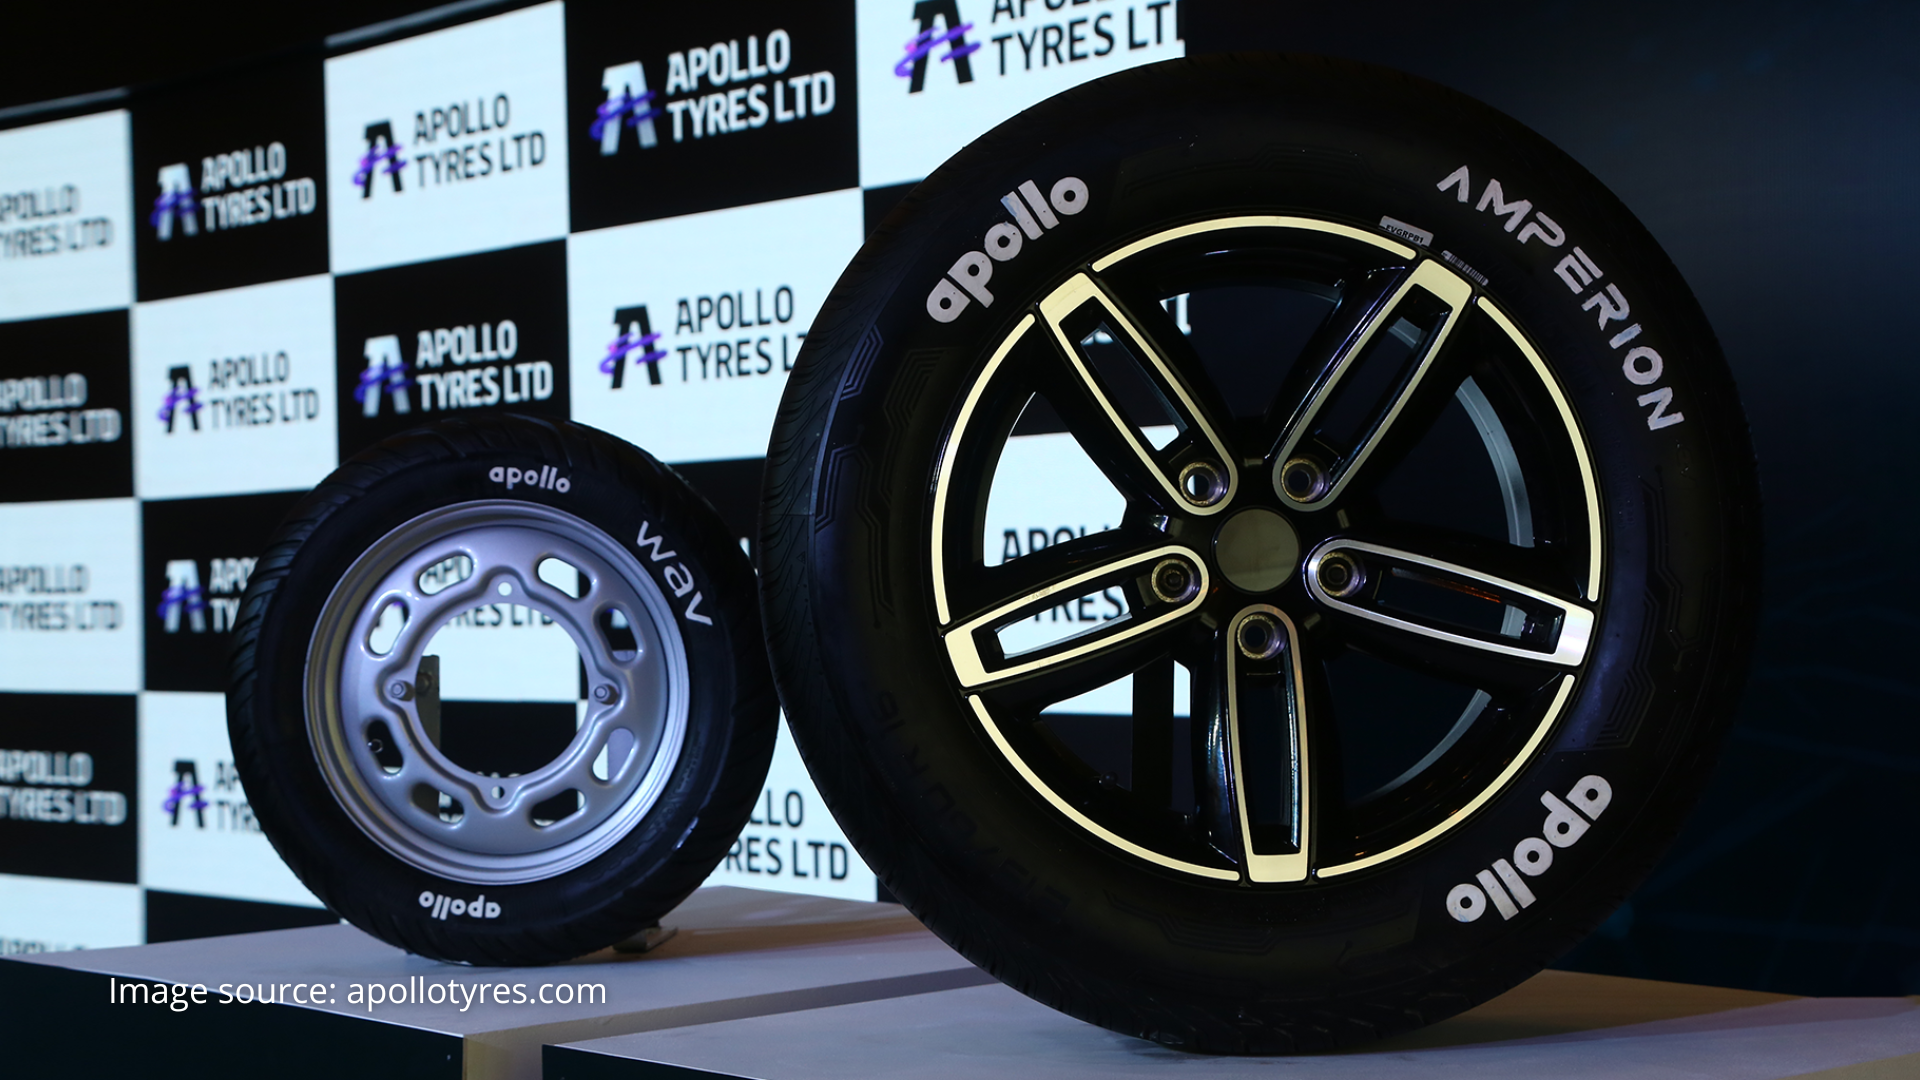 Car Tire, Motor Vehicle Tires, Apollo Tyres, Truck, Mrf, Tire Code, Retail,  Wheel, Car, Motor Vehicle Tires, Apollo Tyres png | PNGWing